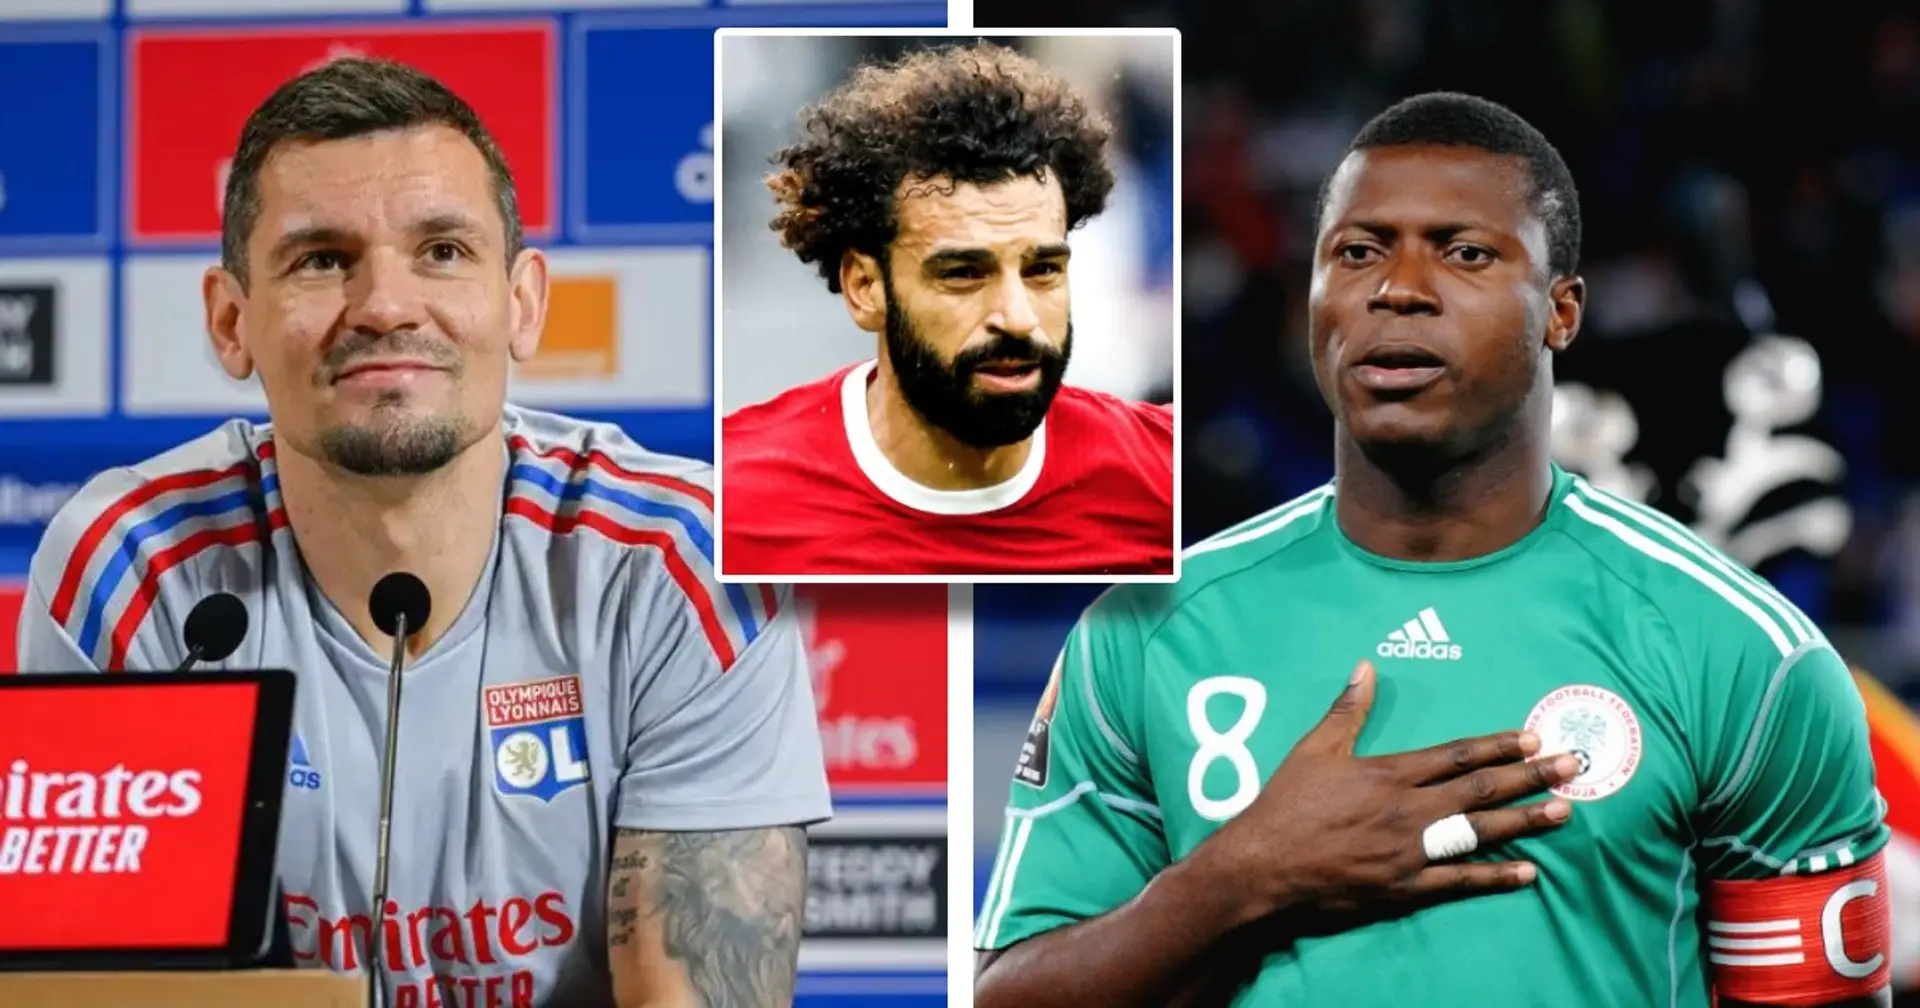 Lovren slams Yakubu over Salah quote – but there's a catch